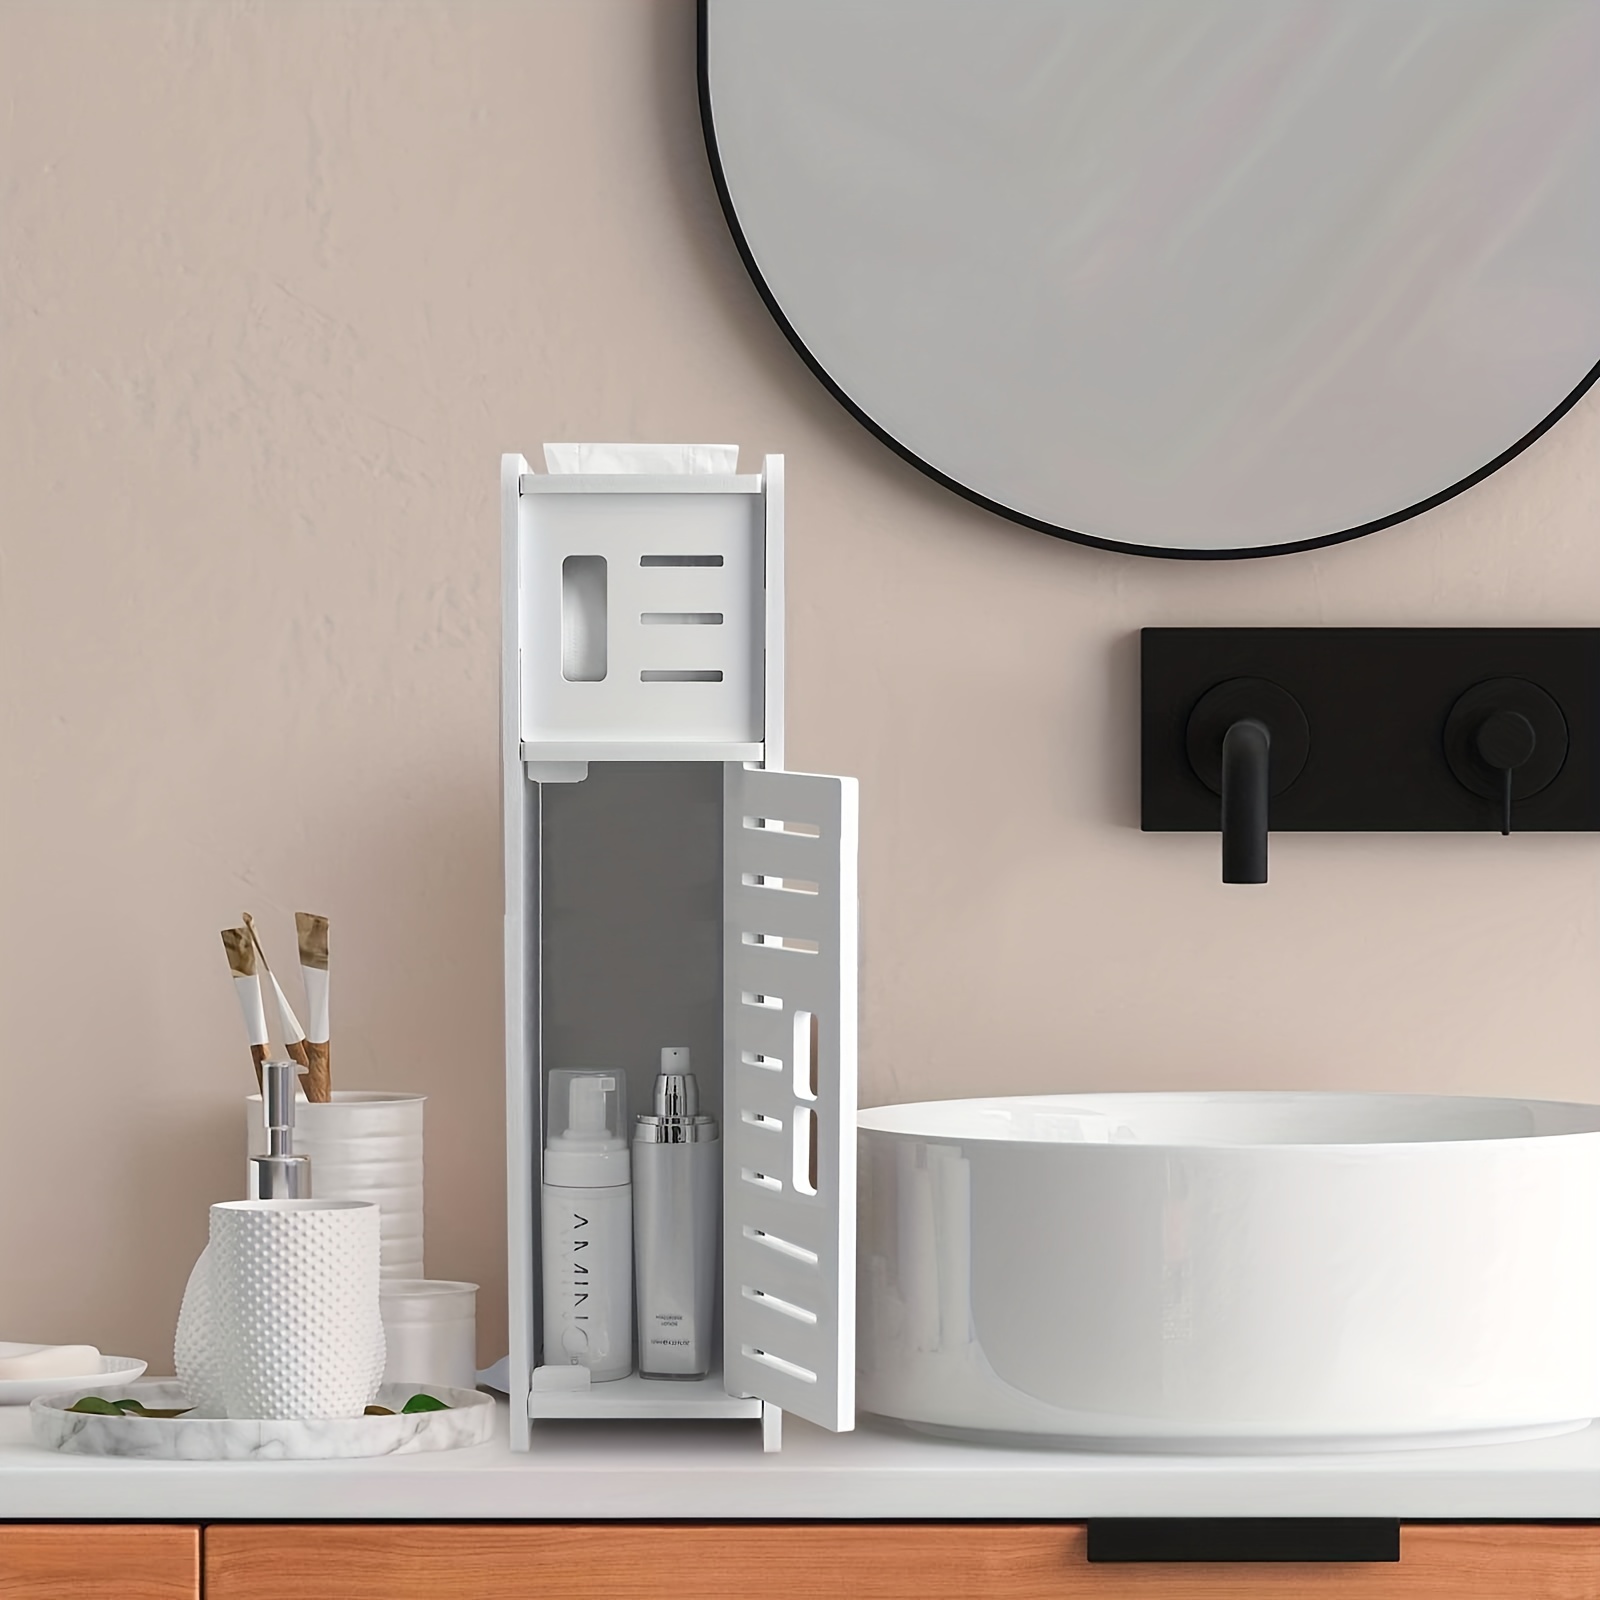 AOJEZOR: Small Bathroom Storage Cabinet Great for Toilet Paper